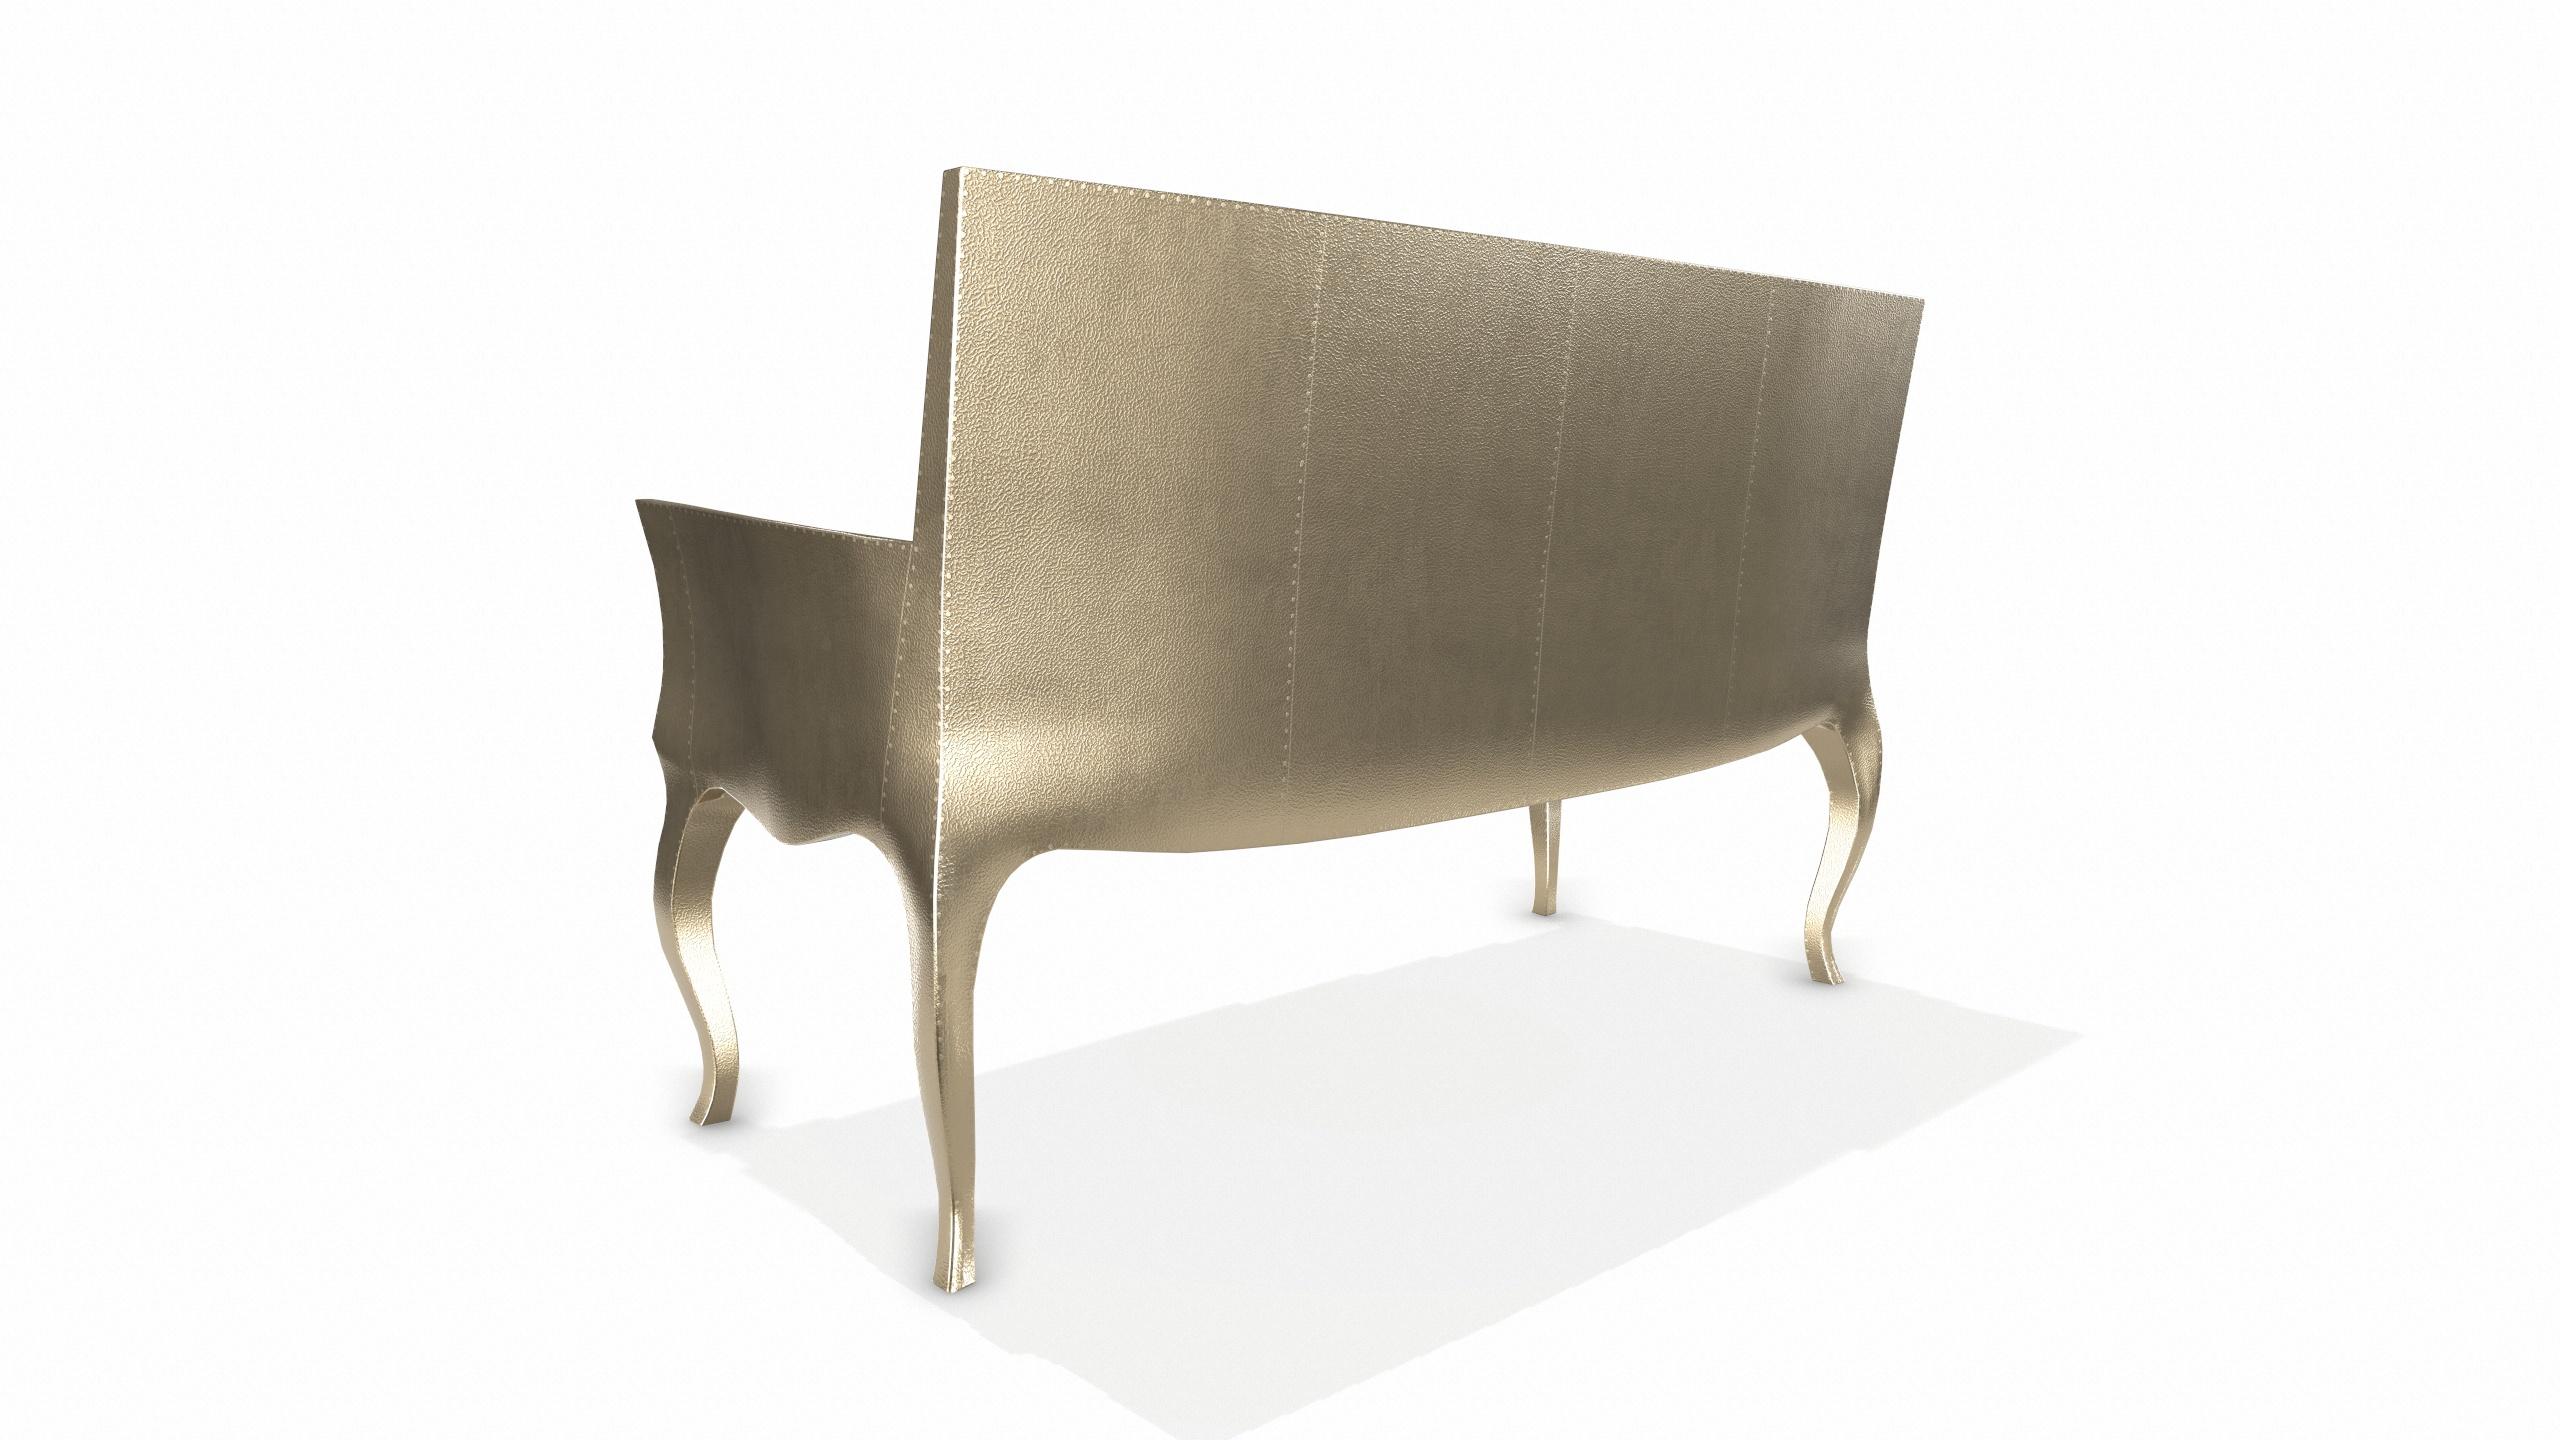 Other Louise Settee Art Deco Daybeds in Fine Hammered Brass by Paul Mathieu For Sale